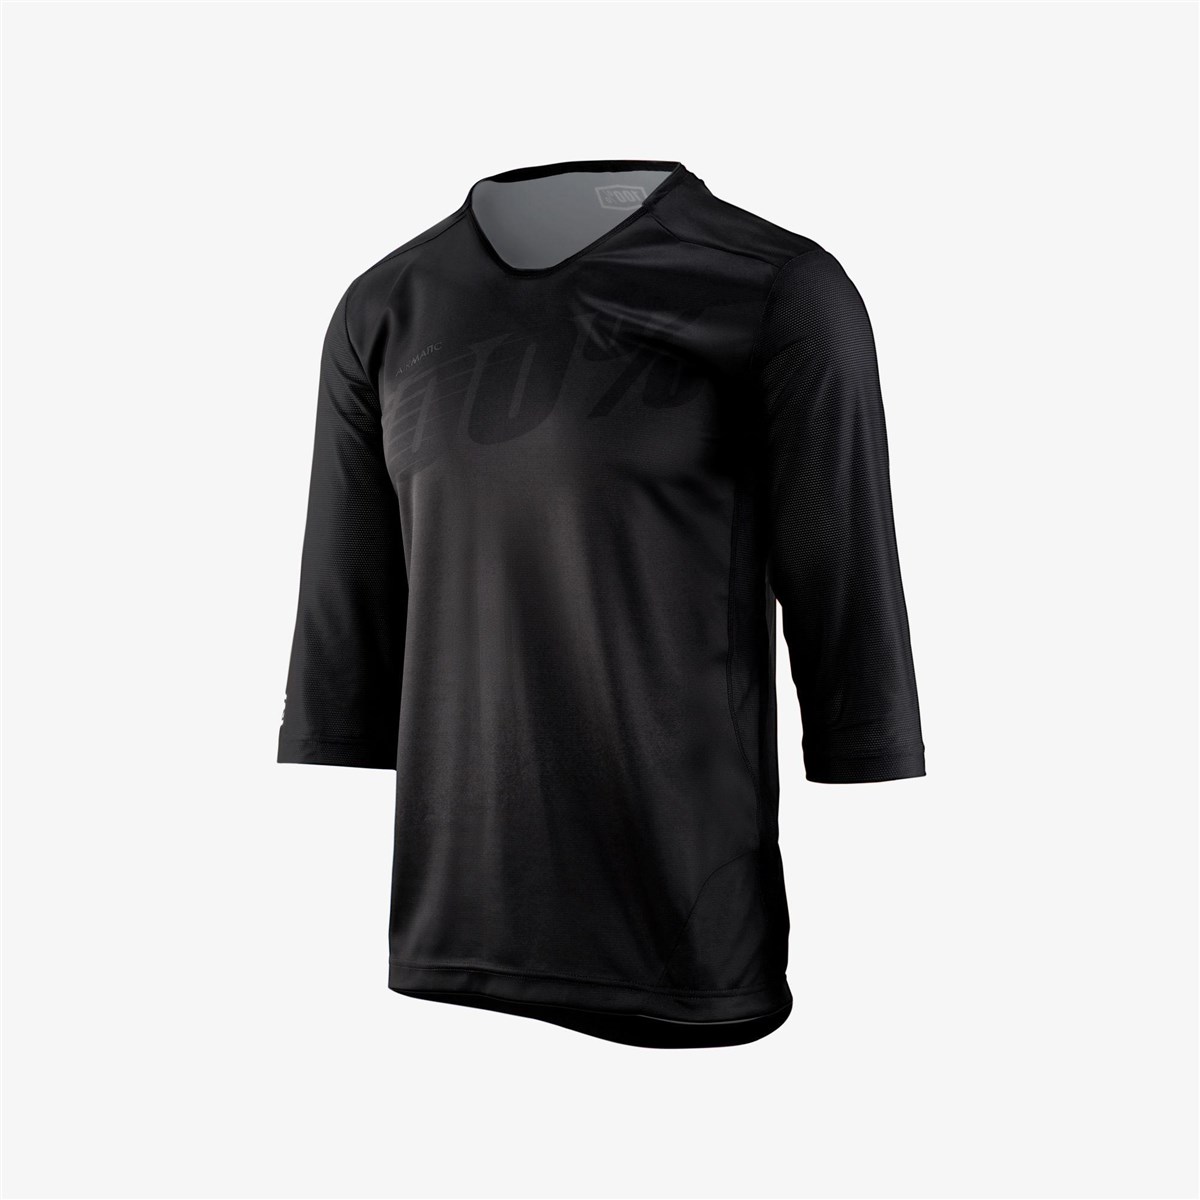 100% Airmatic 3/4 Sleeve Jersey product image